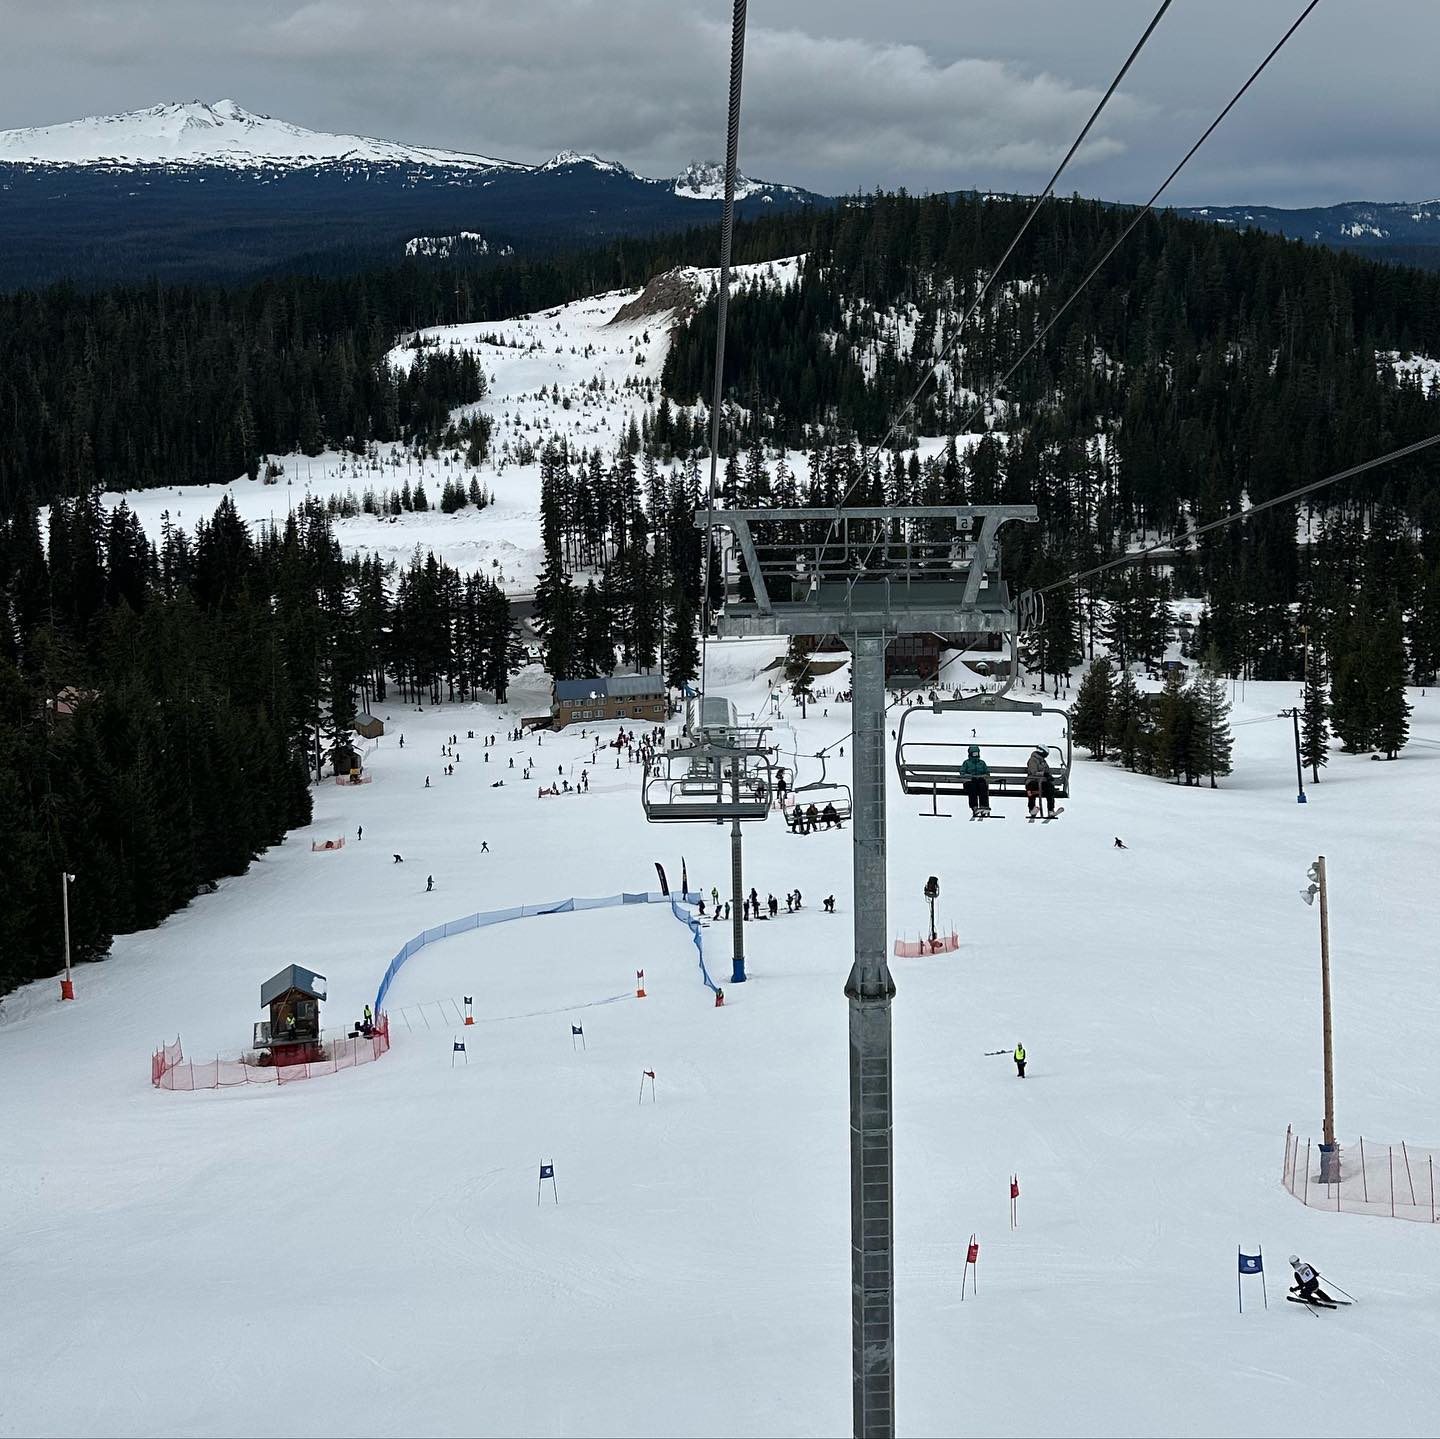 The chair lift at Willamette Pass.